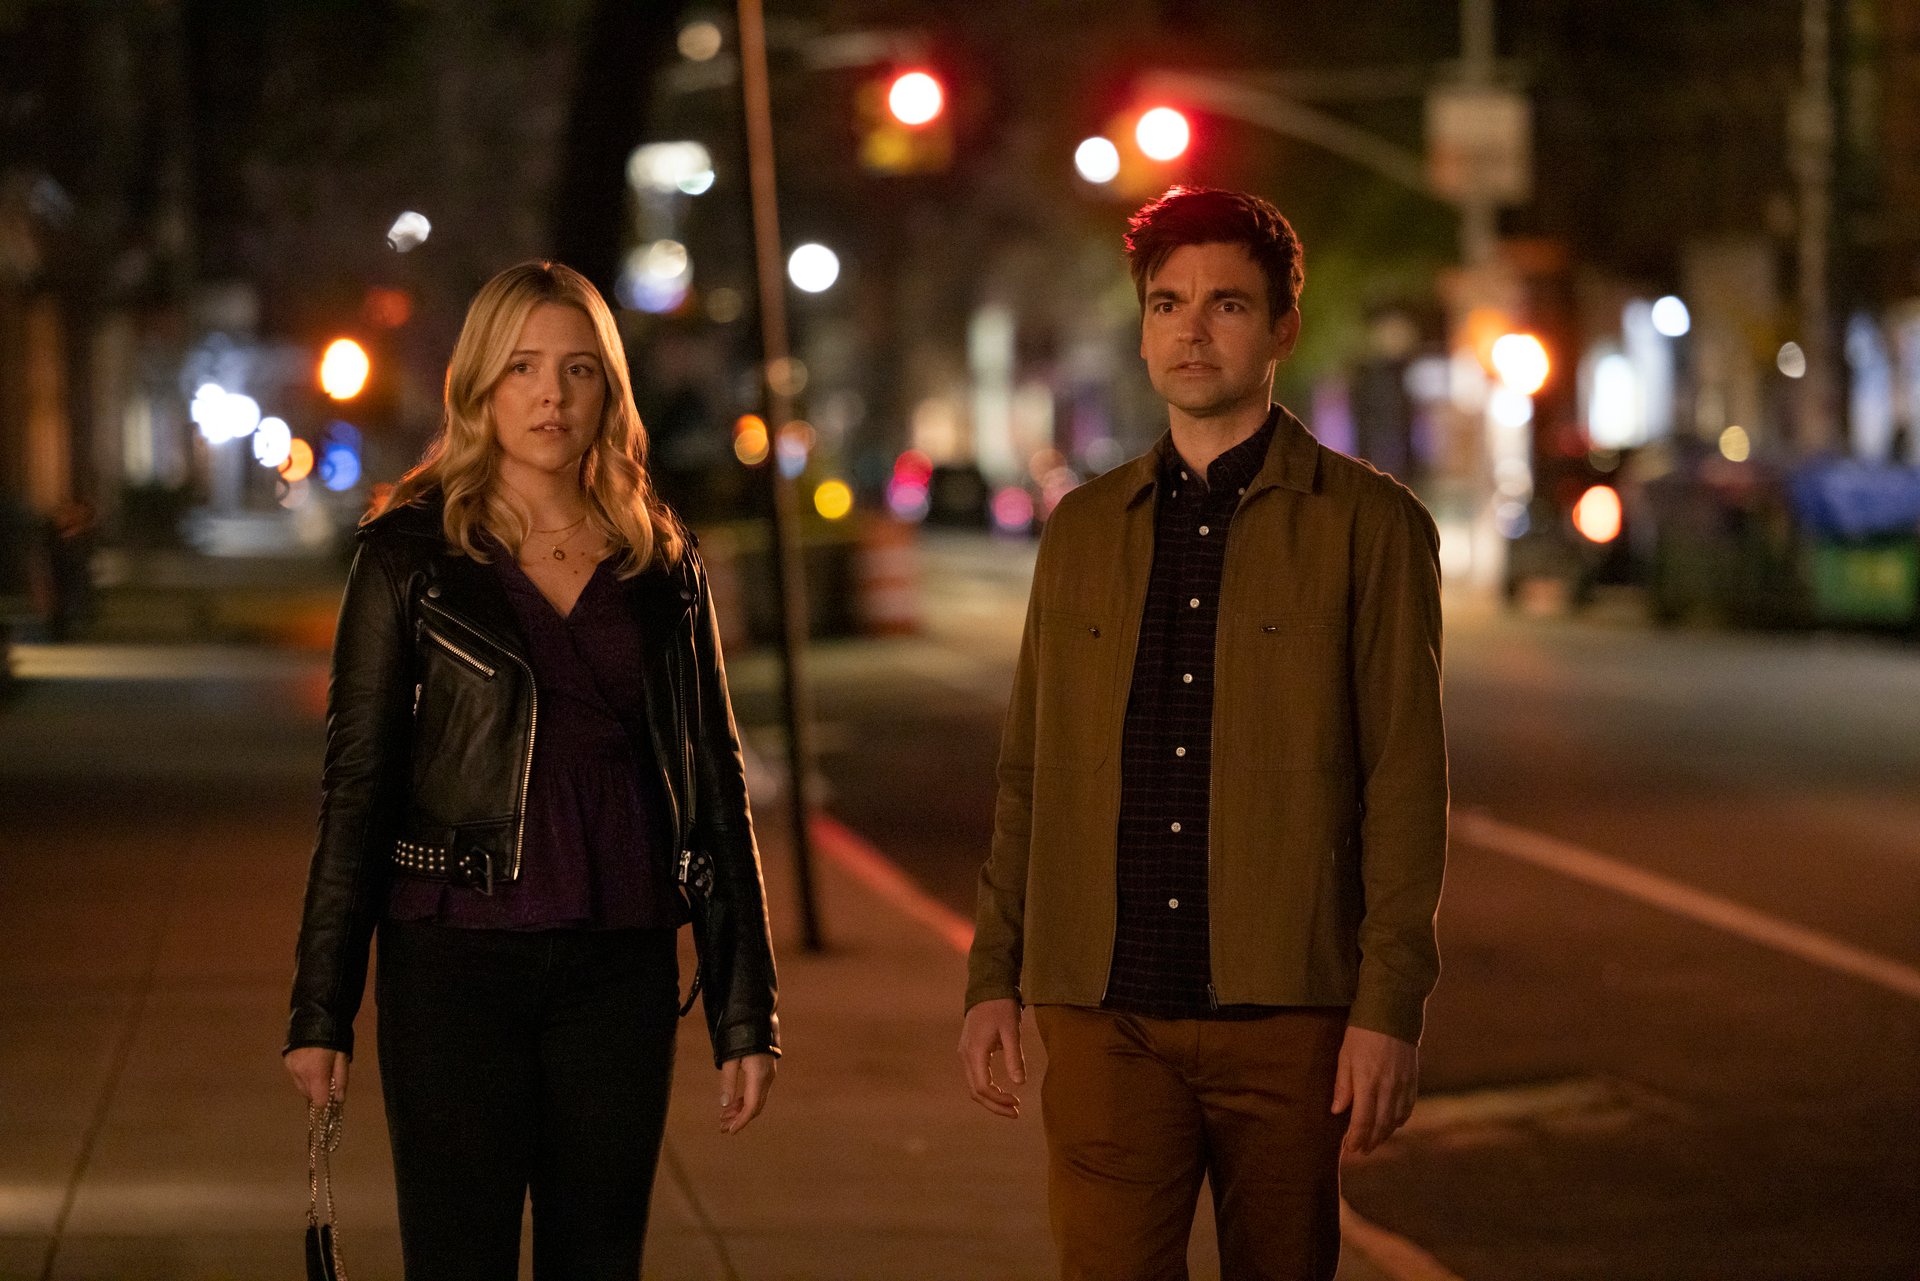 A production still of Heléne Yorke and Drew Tarver in 'The Other Two' showing them outside on a city street at night.